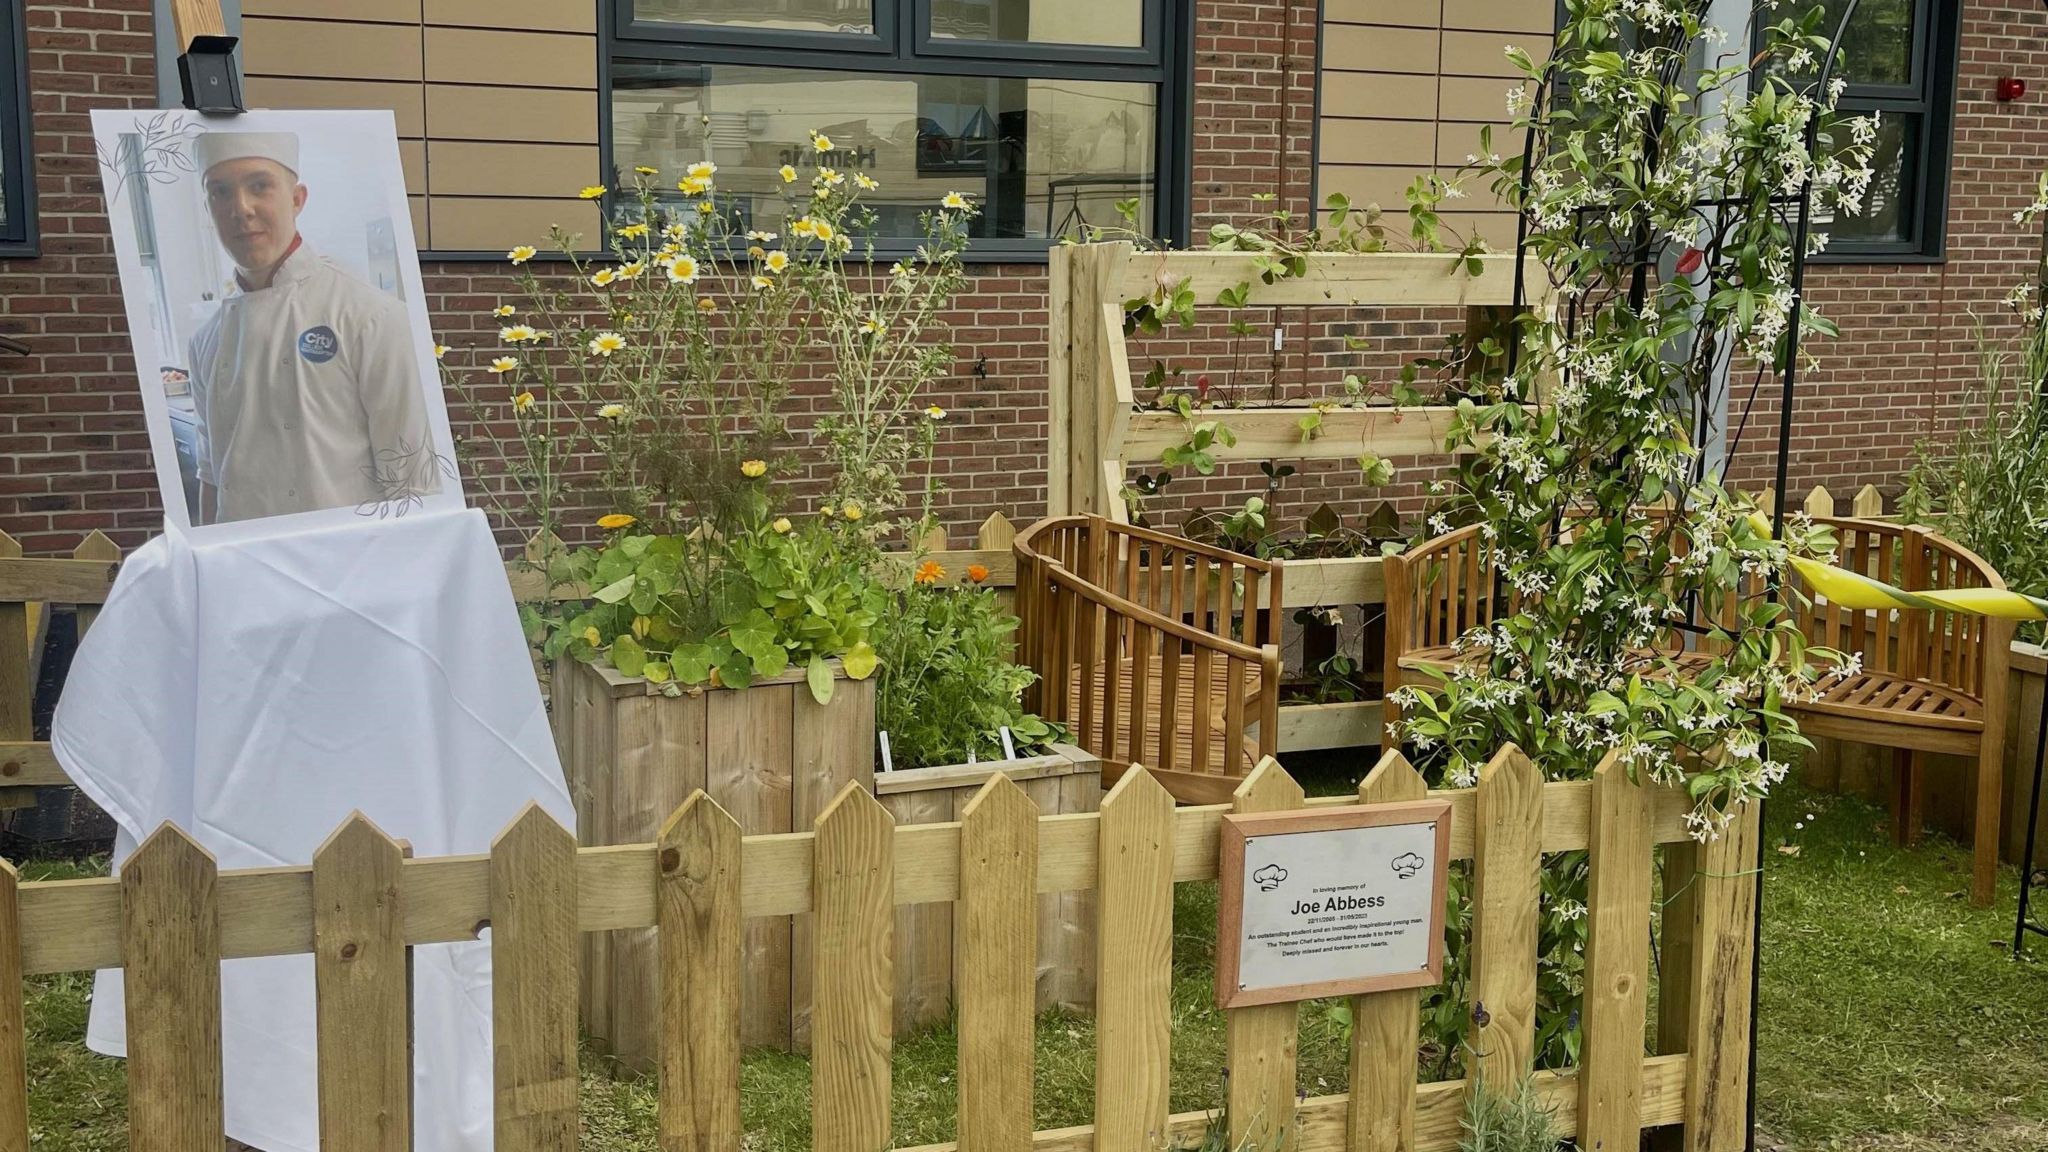 A garden with wooden fencing around and a plaque on the fence which says Joe Abbess on it and there is also an image of Joe printed on card and resting in the garden